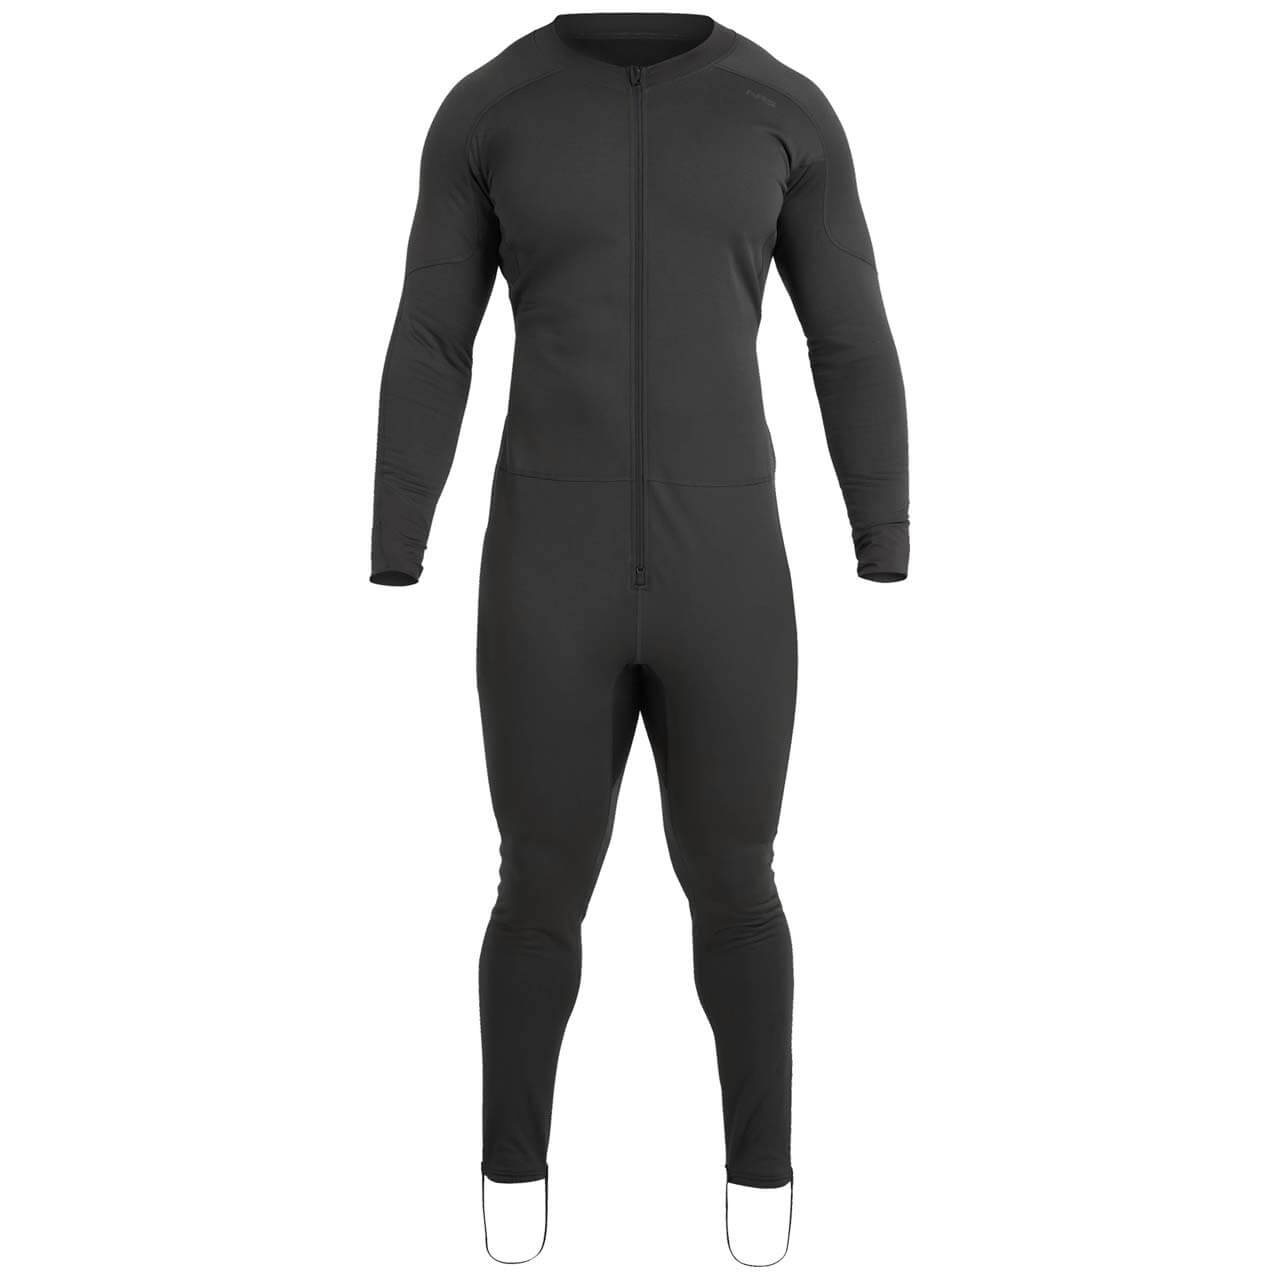 NRS Expedition Weight Union Suit - Graphite, S von NRS